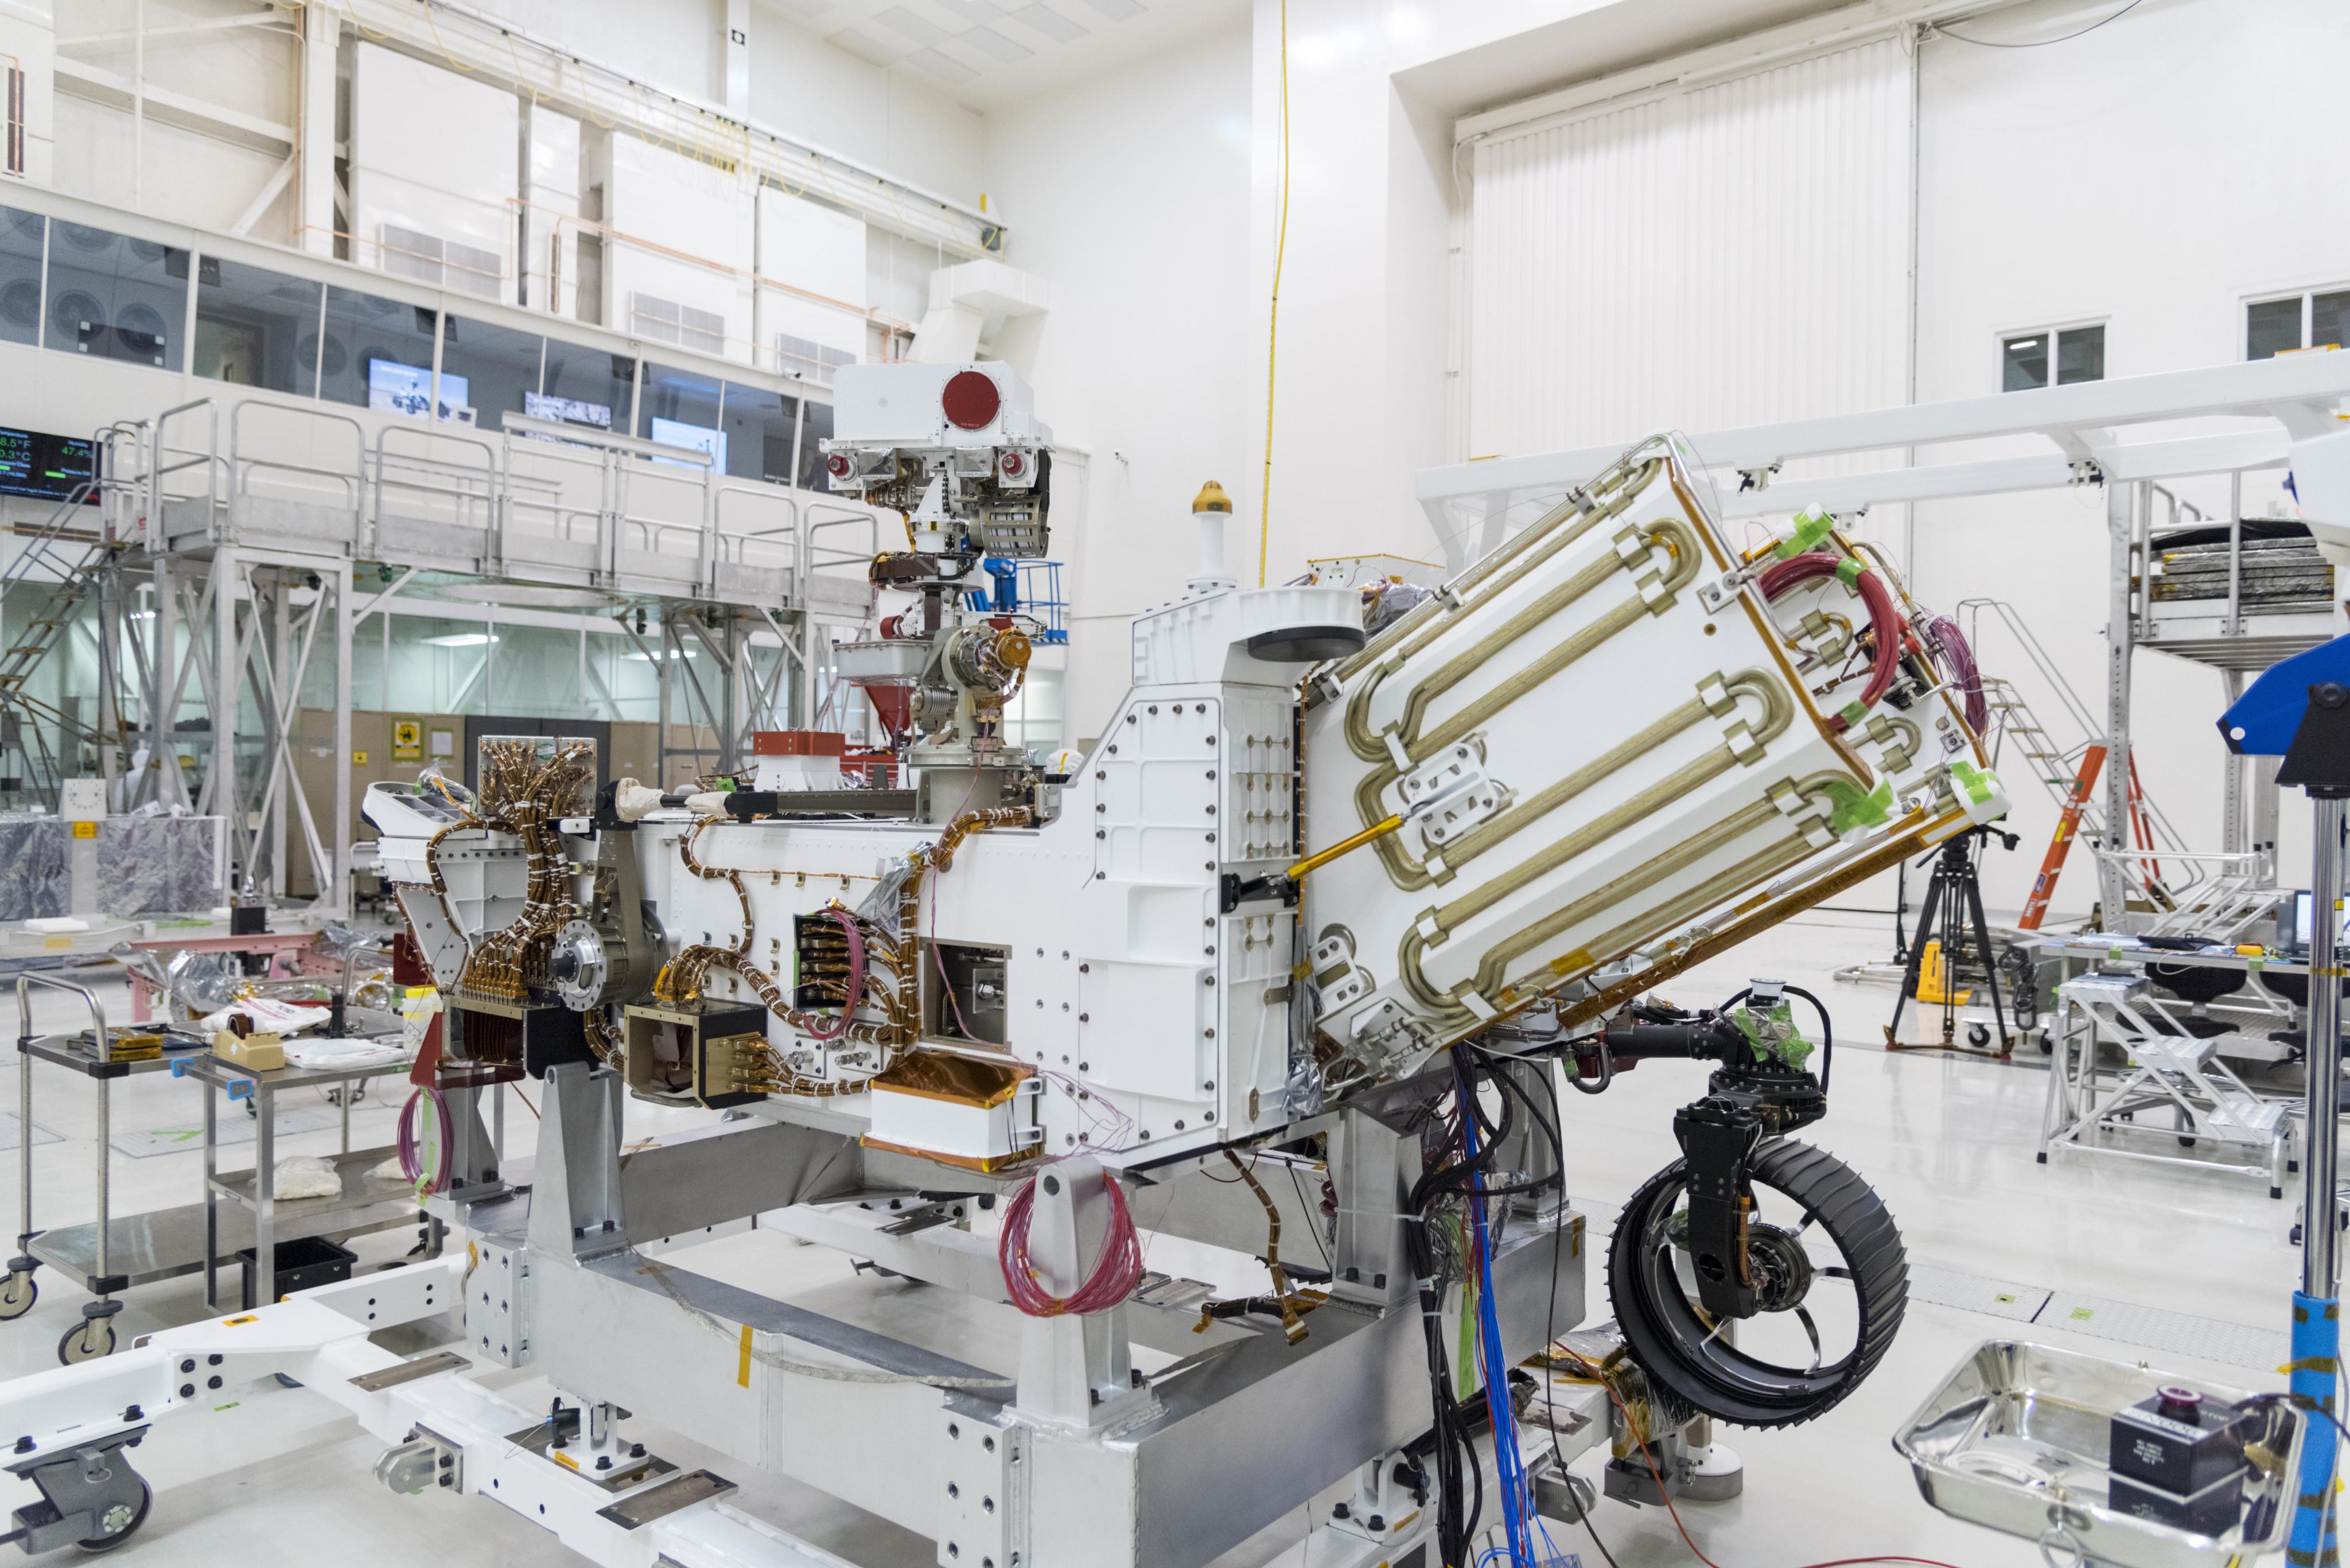 A partially assembled Mars rover in the cleanroom at JPL. The rover's Radioisotope Thermoelectric Generator is jutting from the back of the rover.